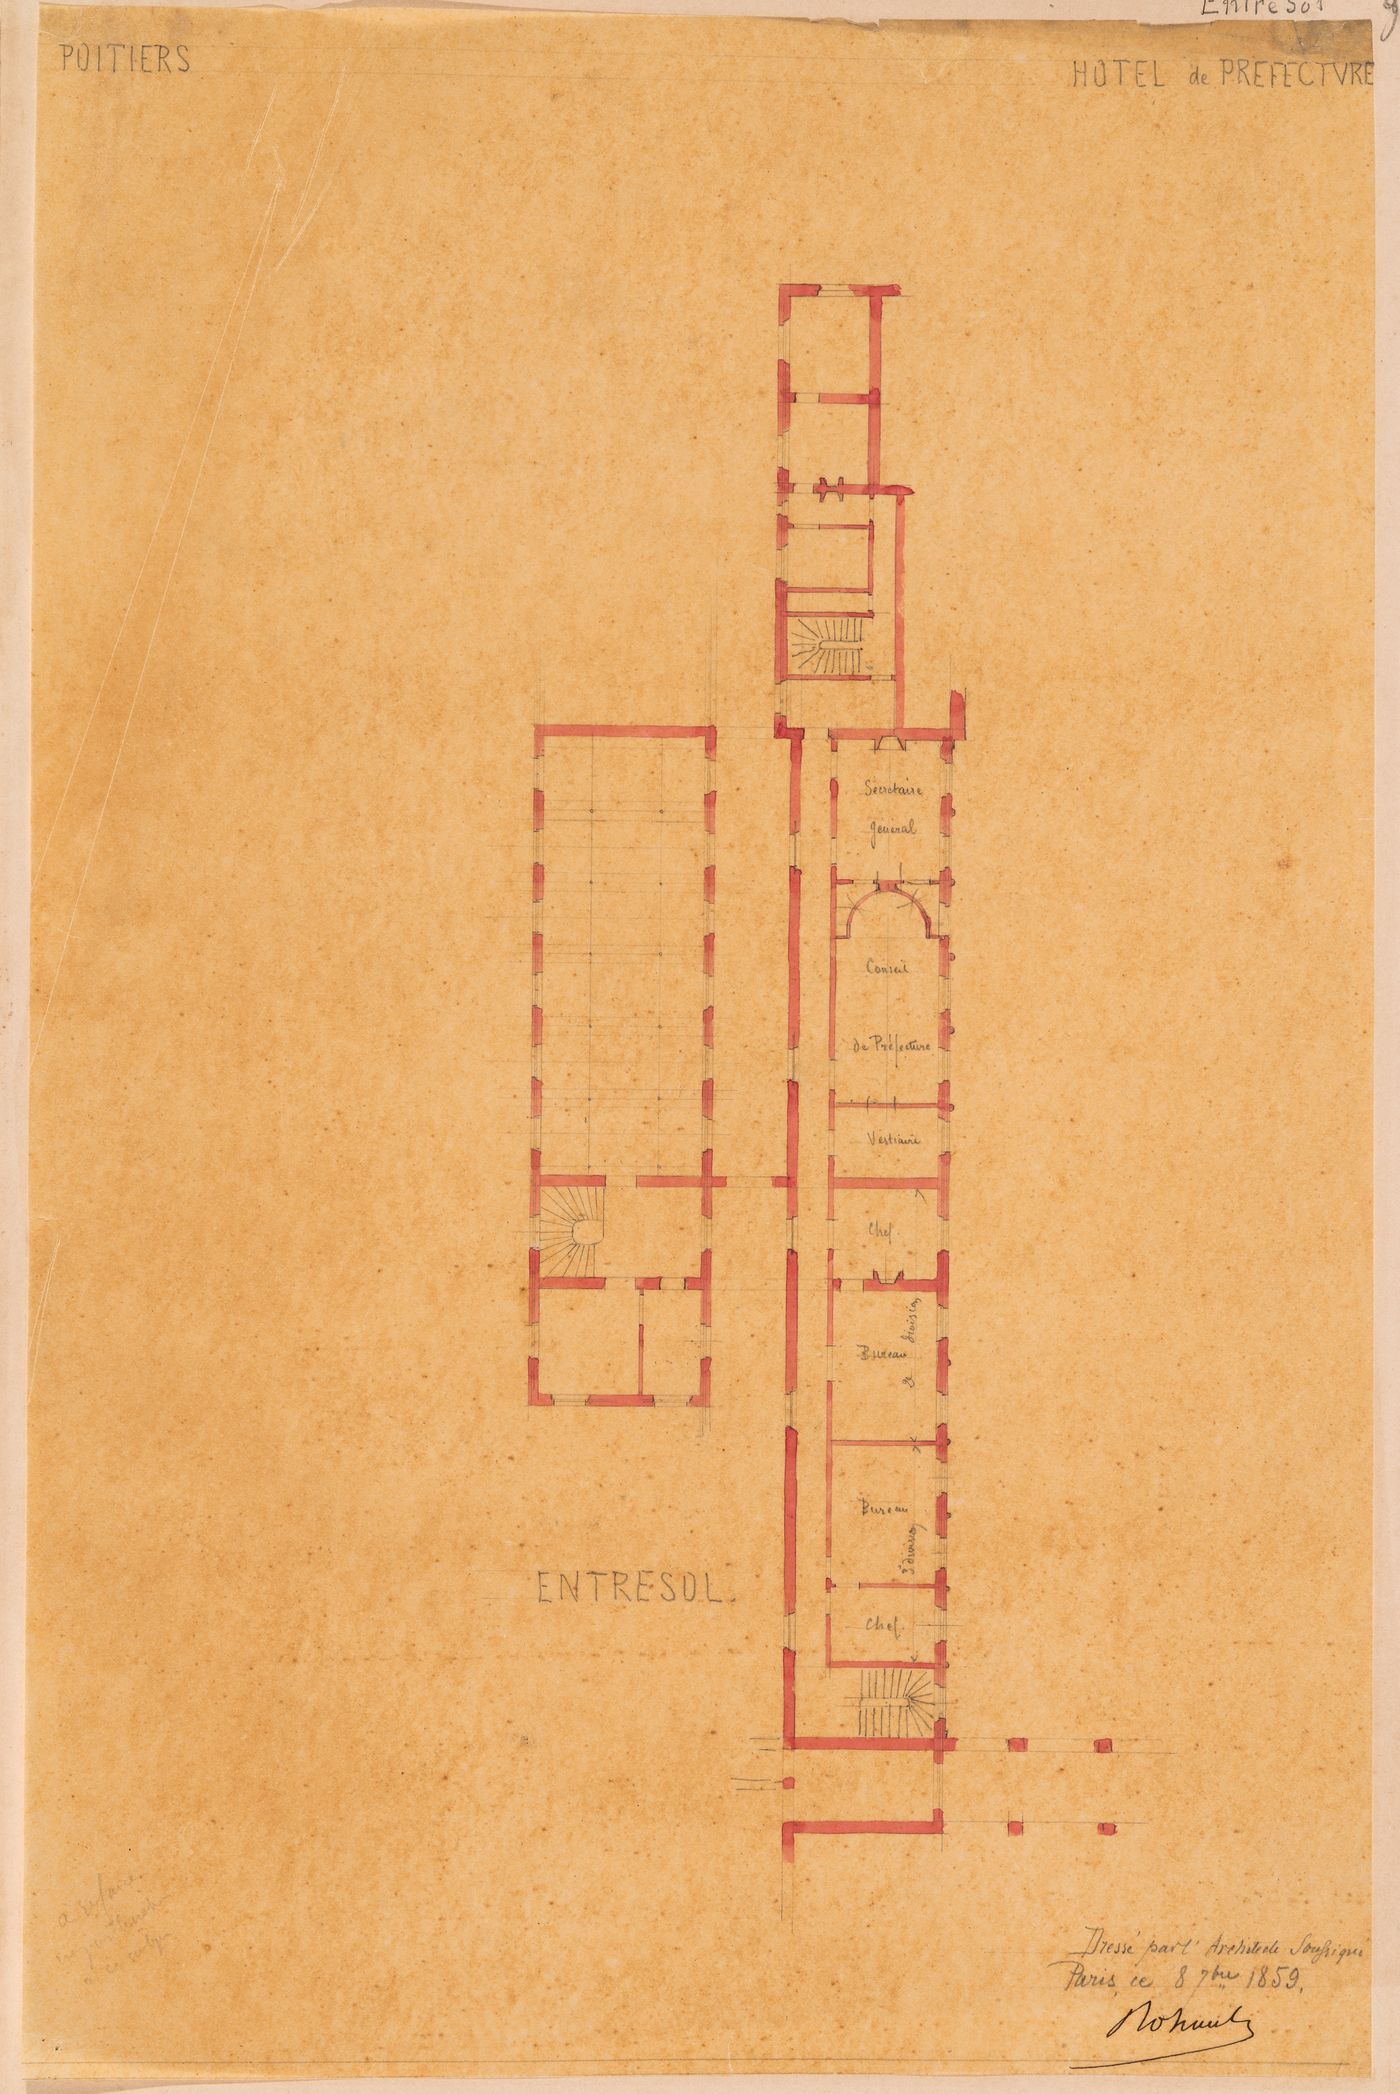 Project for a Hôtel de préfecture, Poitiers: Plan for the "entresol" for the offices and the ground floor for the Archives building